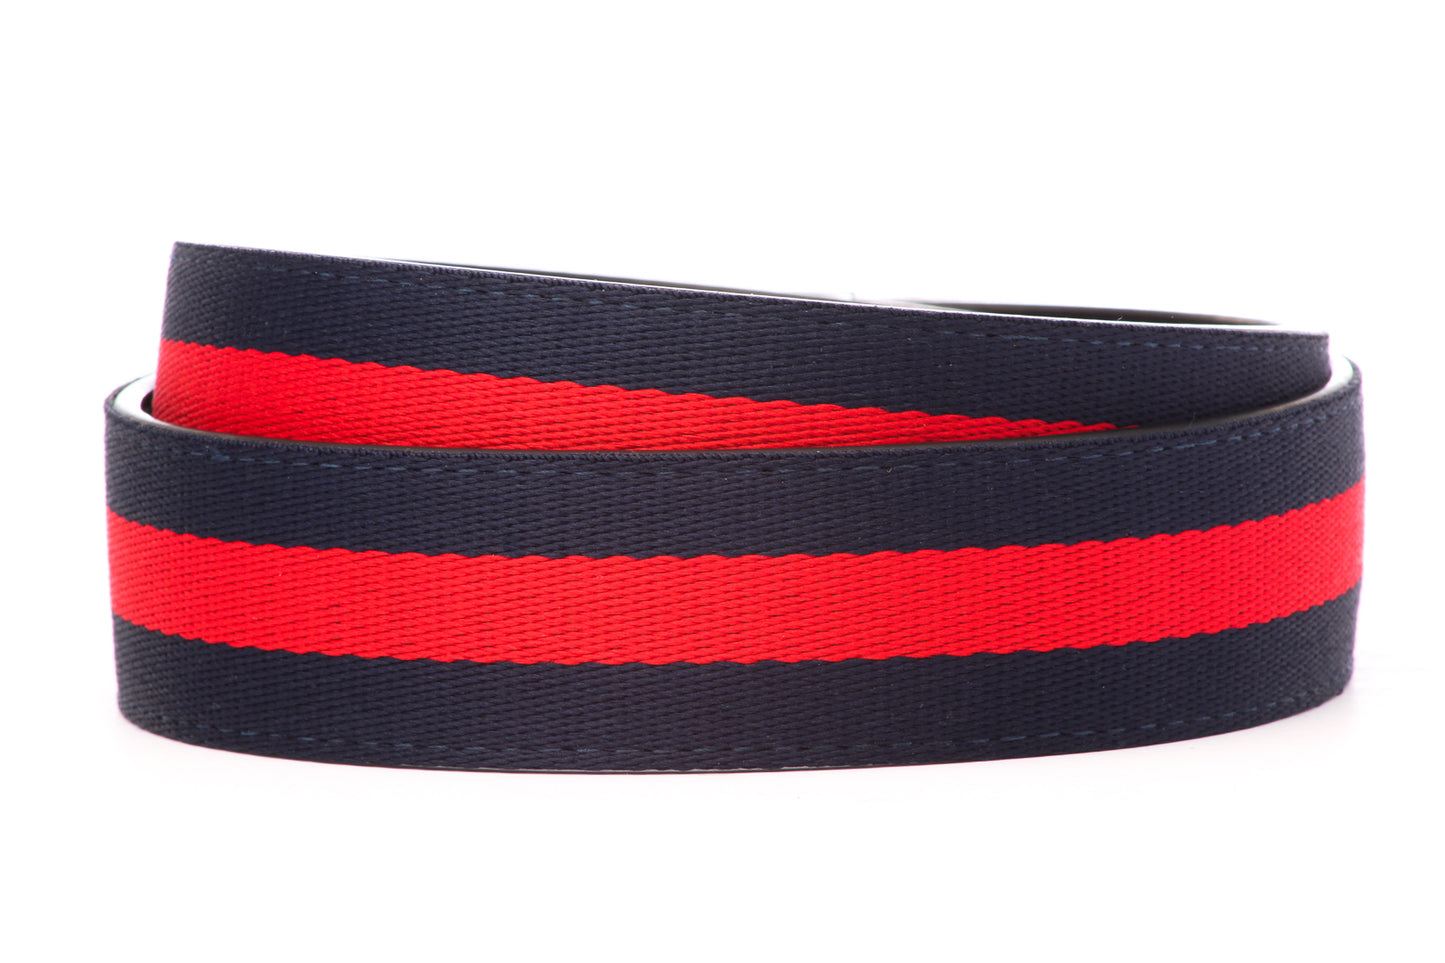 Men's cloth belt strap in navy with red stripe, 1.5 inches wide, casual look